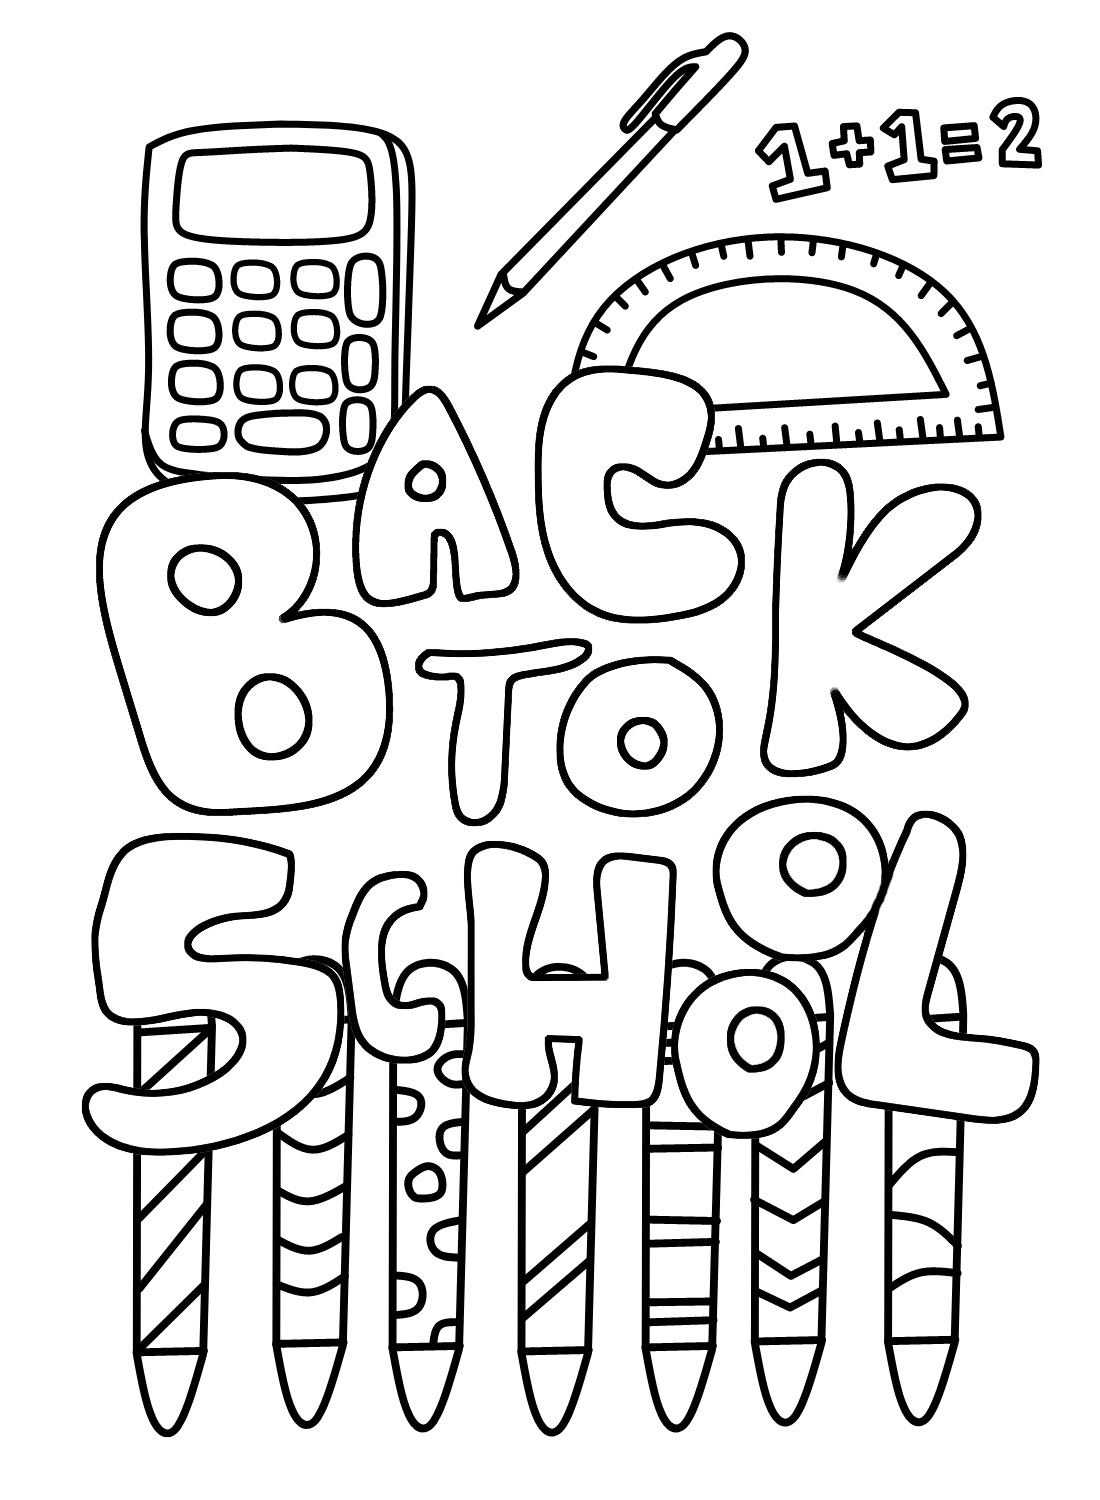 back-to-school-coloring-page-back-to-school-coloring-pages-coloring-pages-for-kids-and-adults